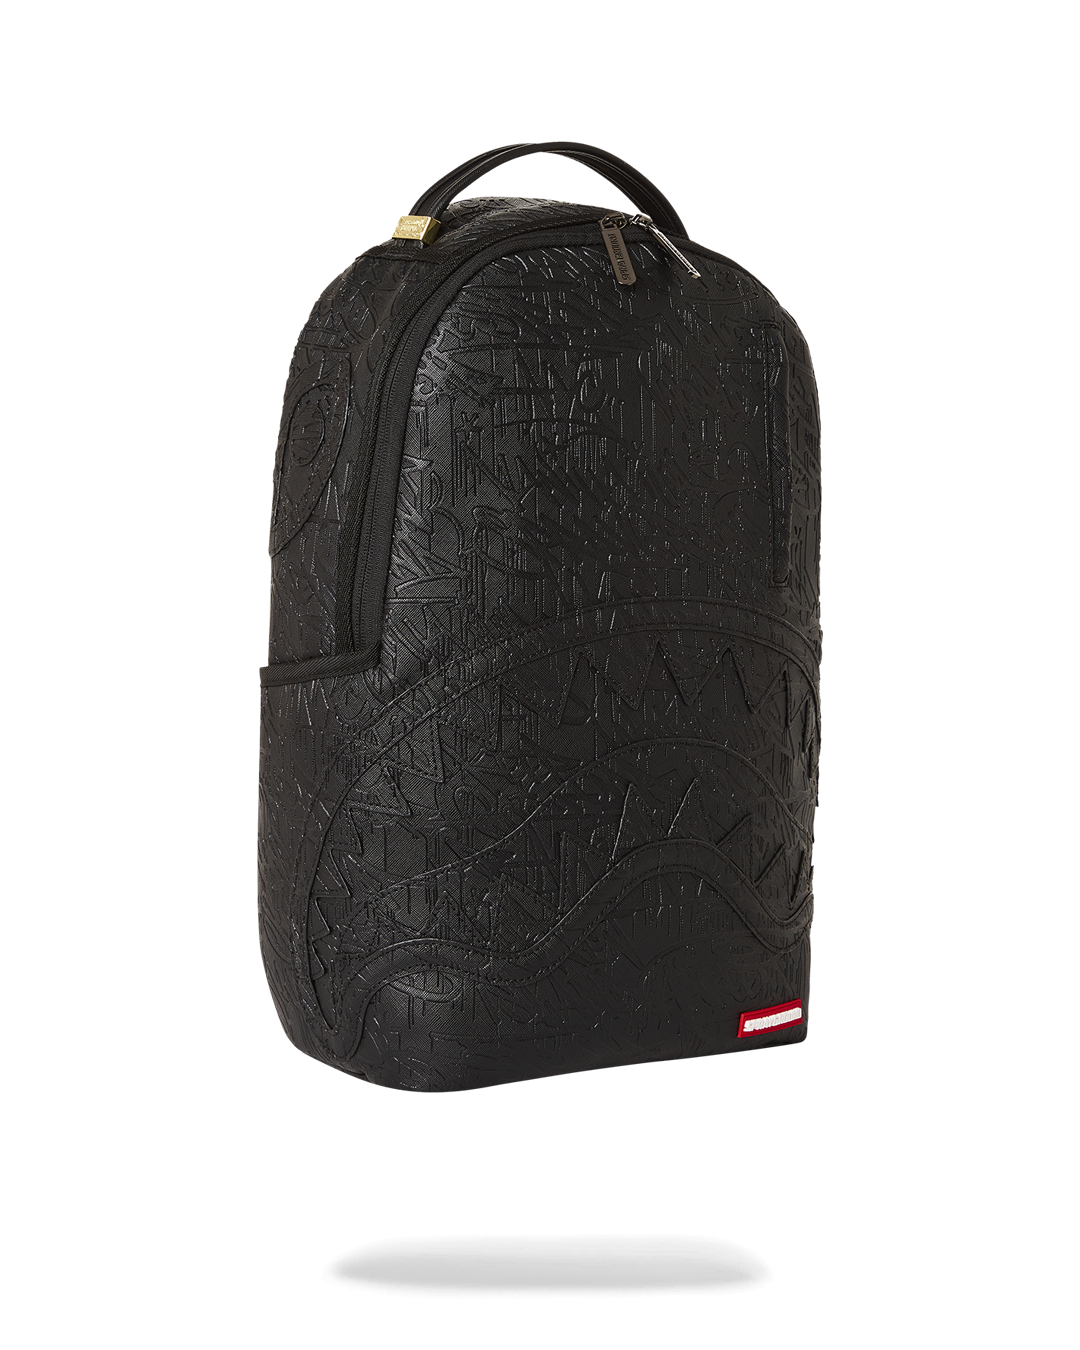 SPRAYGROUND Quality Backpack and Travel Bag Review